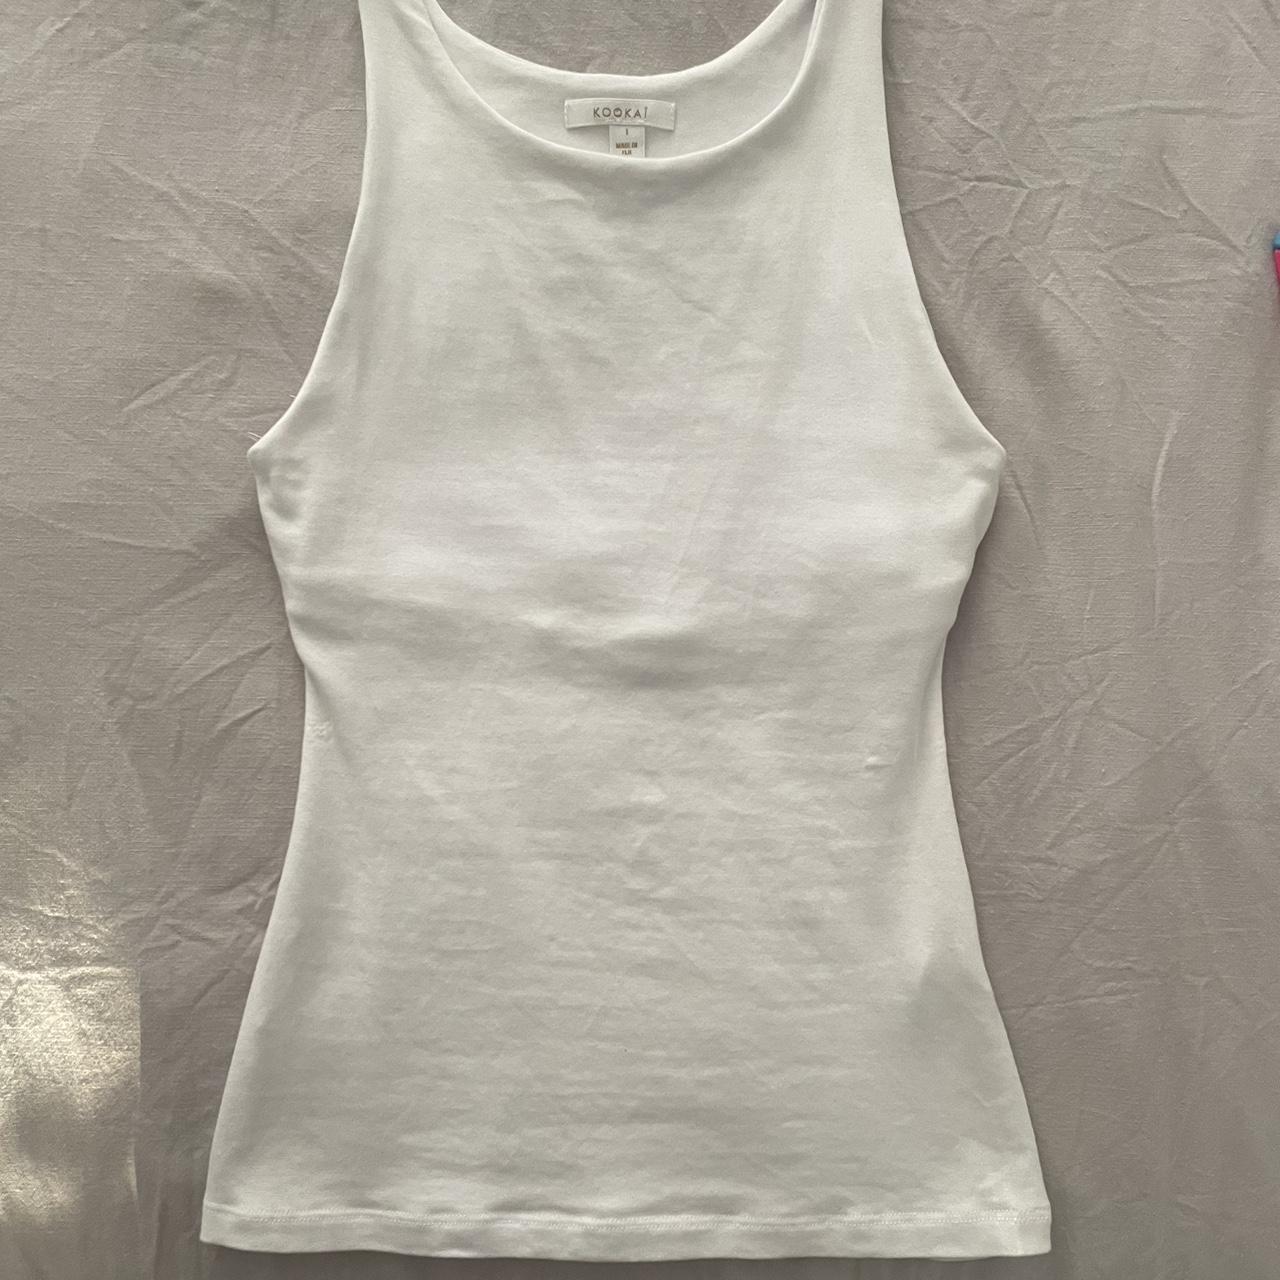 Kookaï Tank White Thick material. Double lined... - Depop